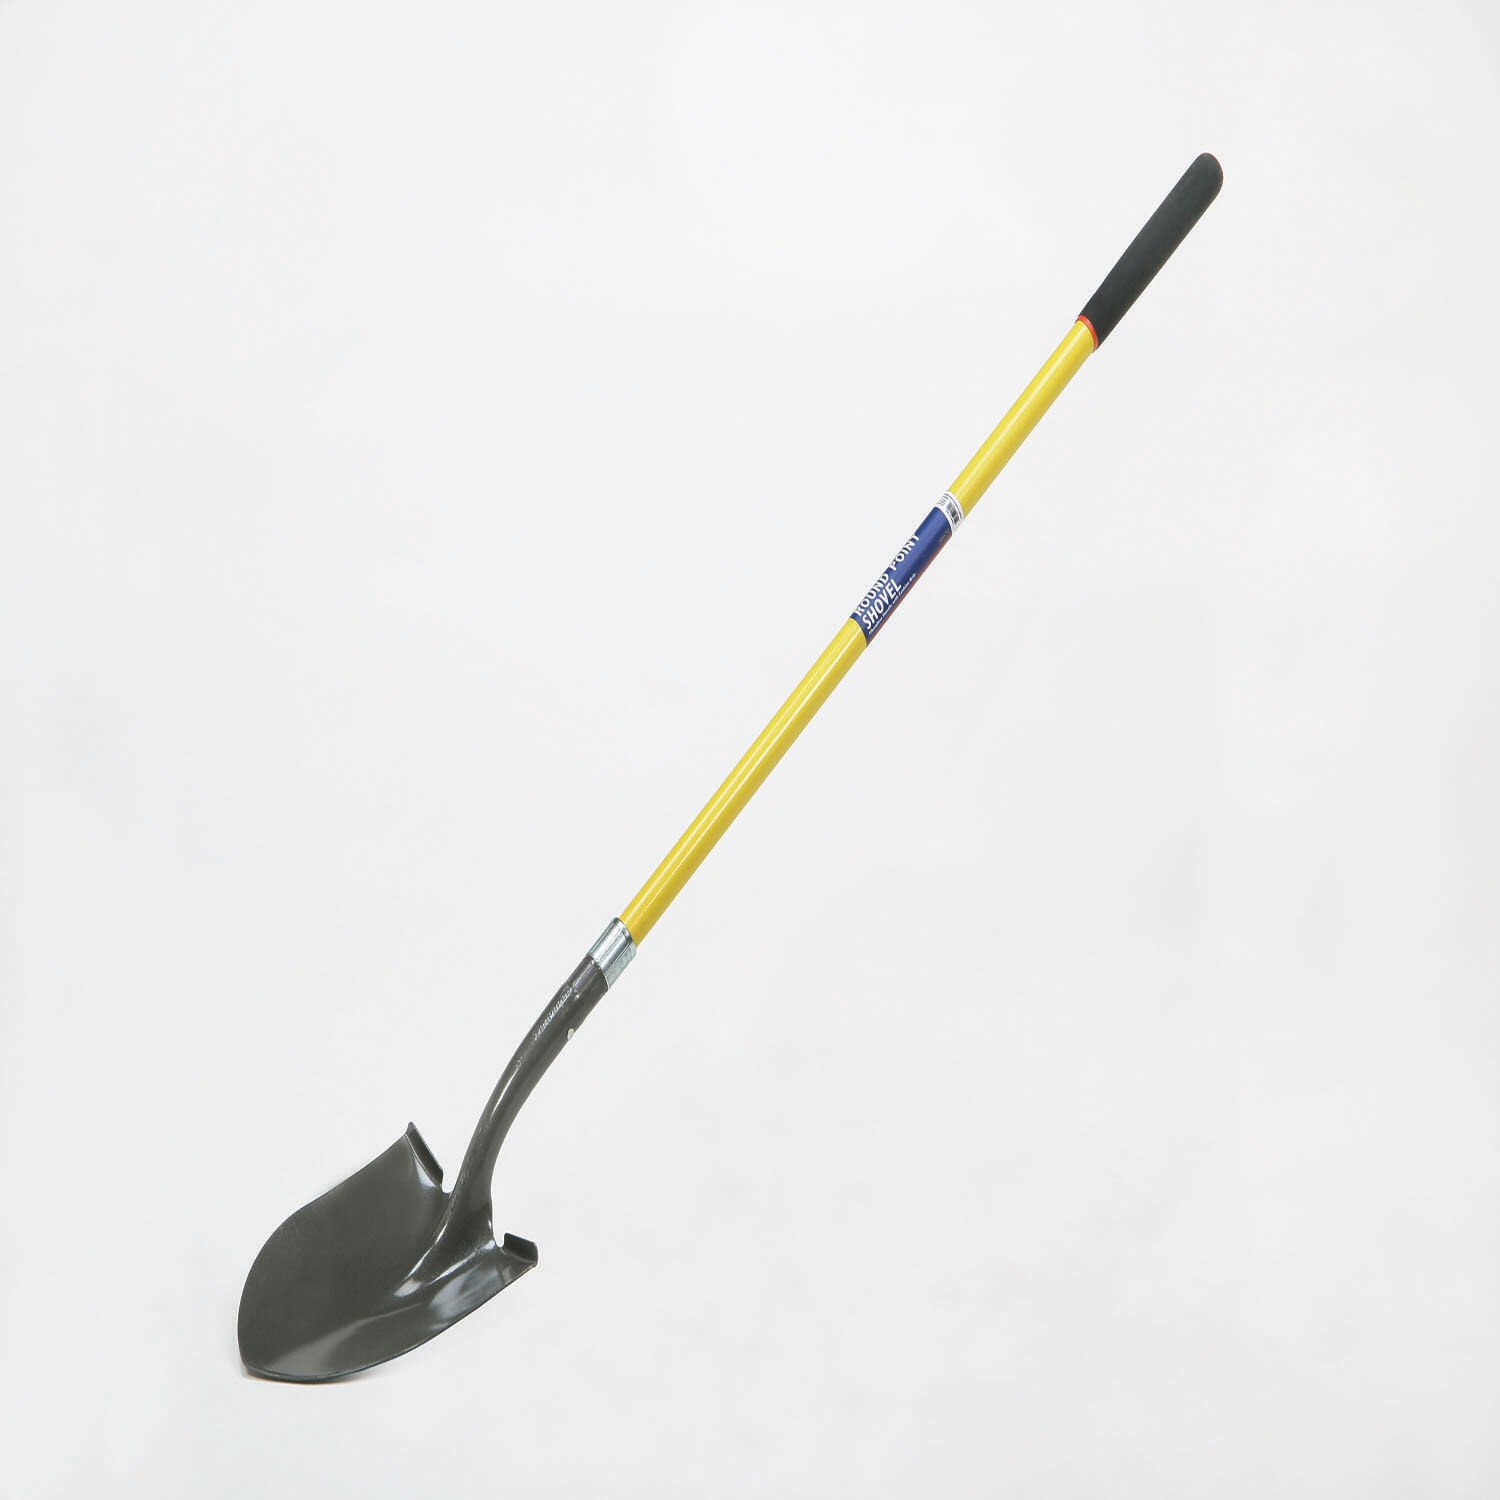 Shovel, Round Point, Closed Back, Industrial Grade, 48" Fiberglass Handle, Cushioned Grip